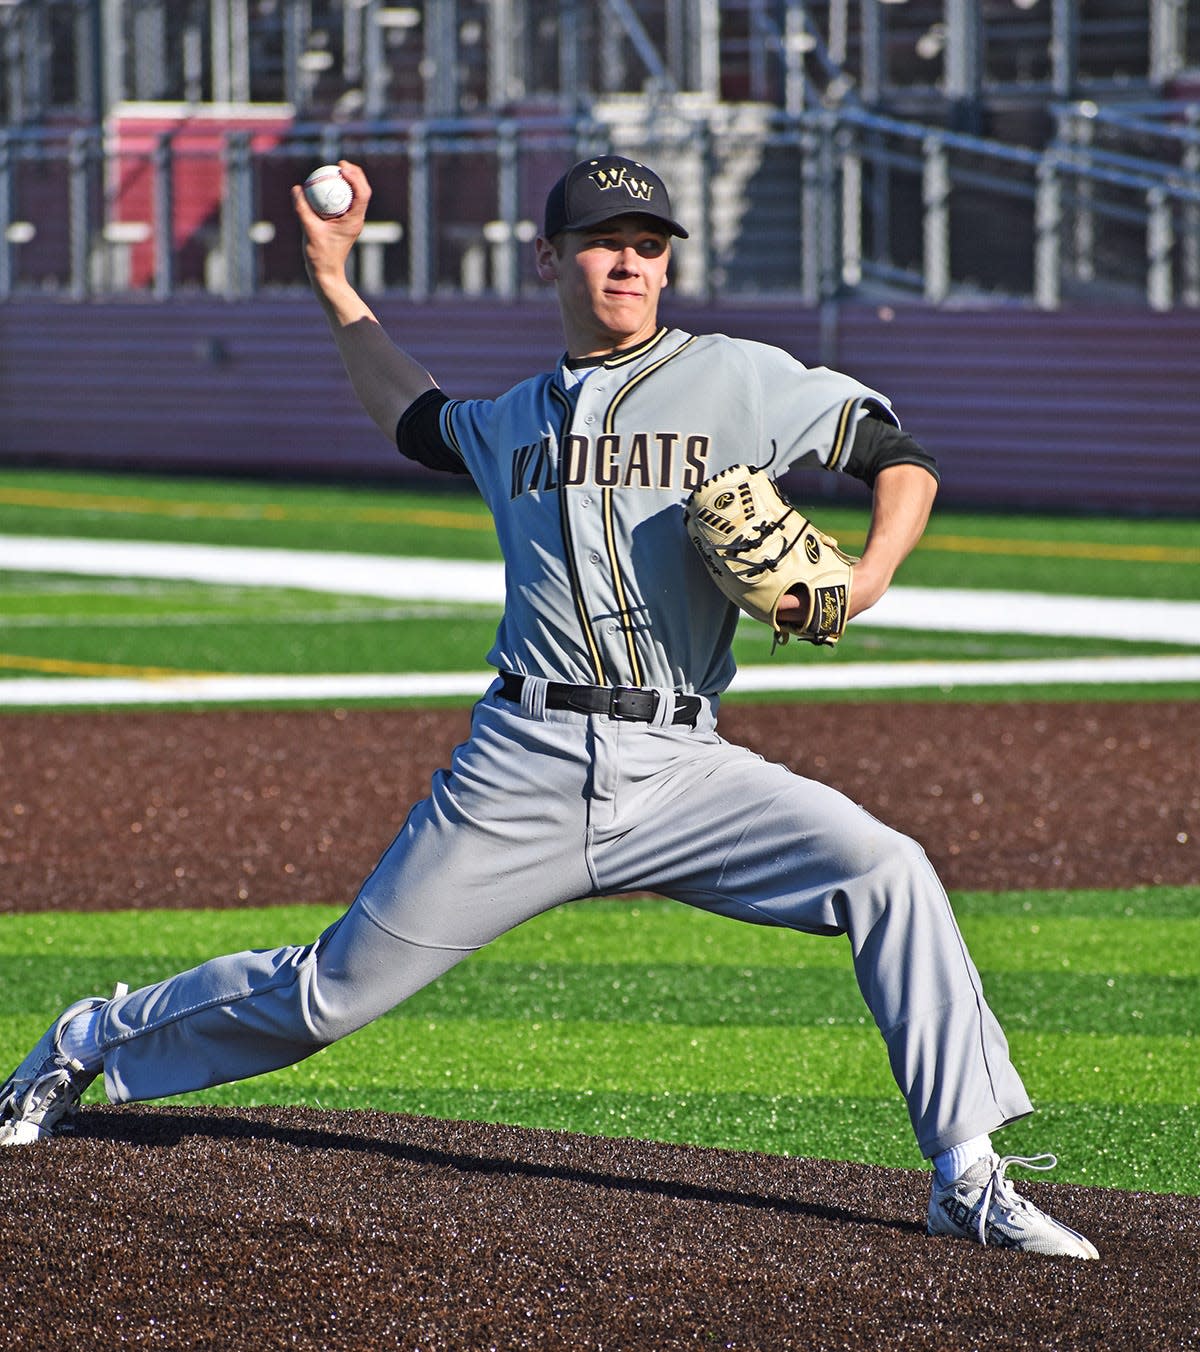 Senior pitcher Ethan Grodack has been a fixture of the Western Wayne starting rotation for three years now.